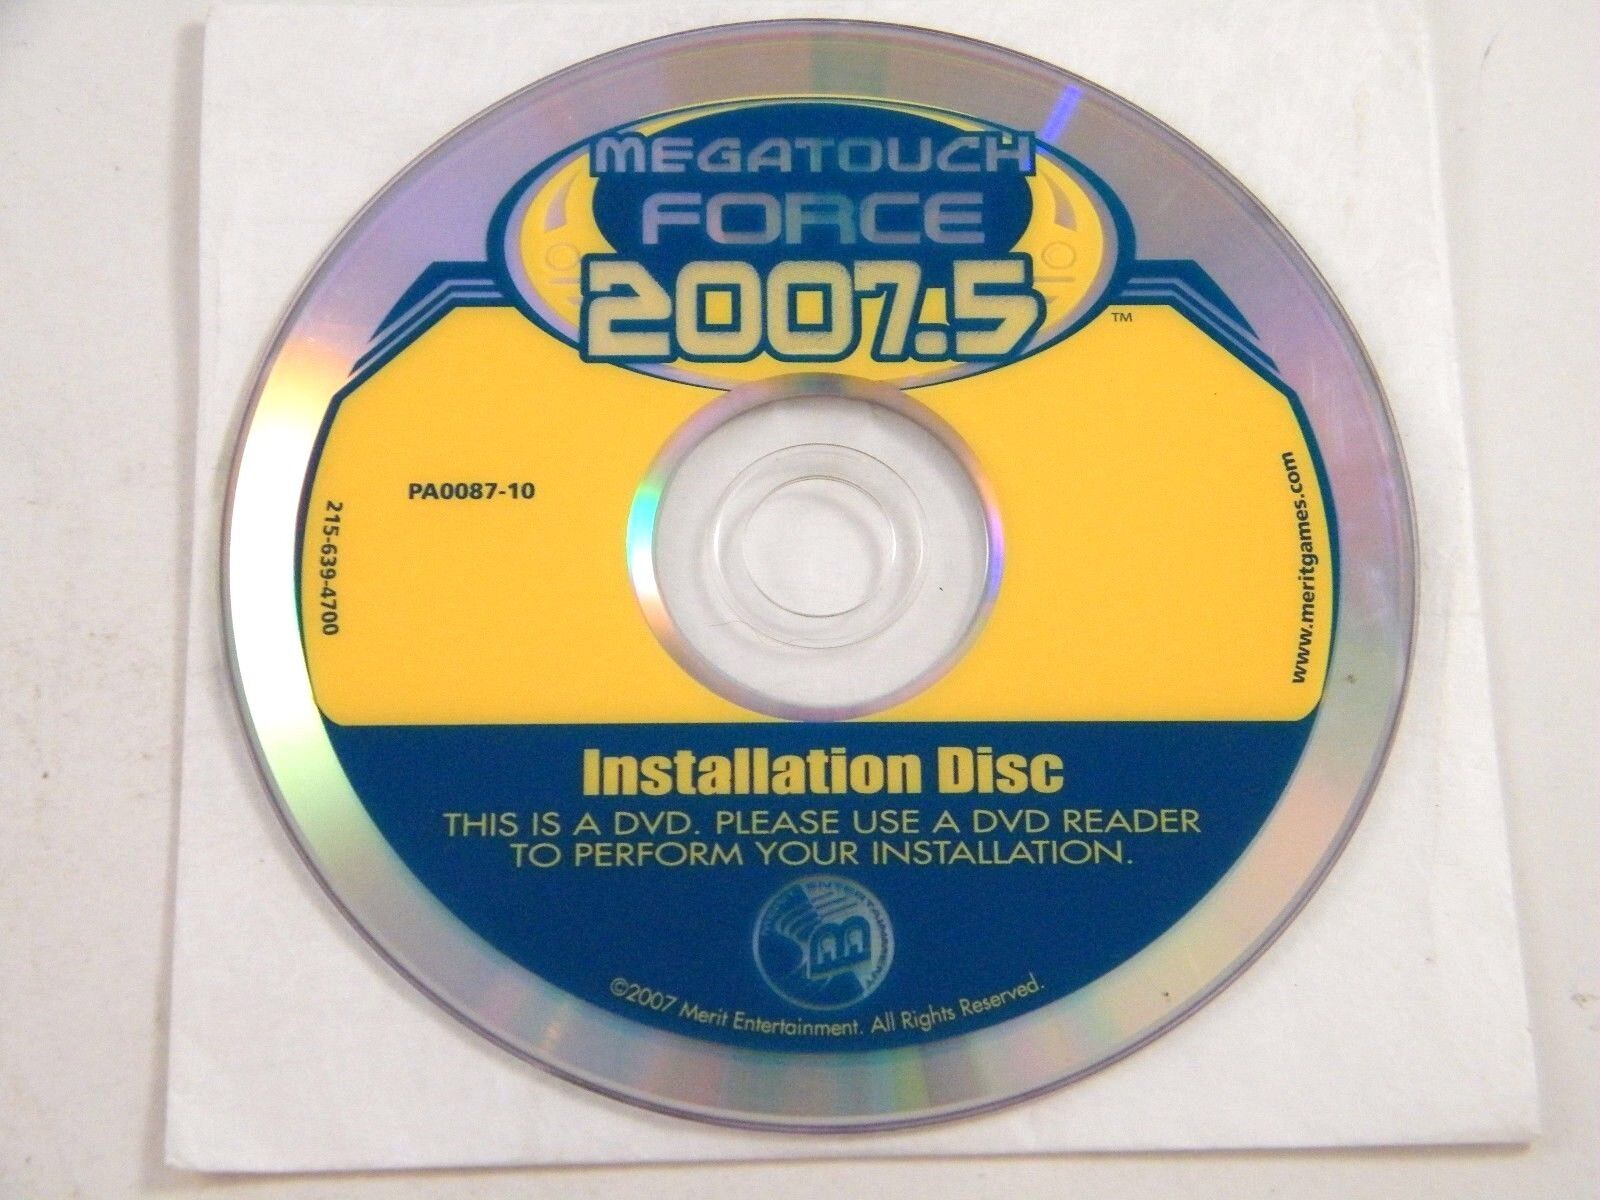 MERIT MEGATOUCH FORCE 2007.5 INSTALLATION DISC DVD ~ NO SECURITY KEY